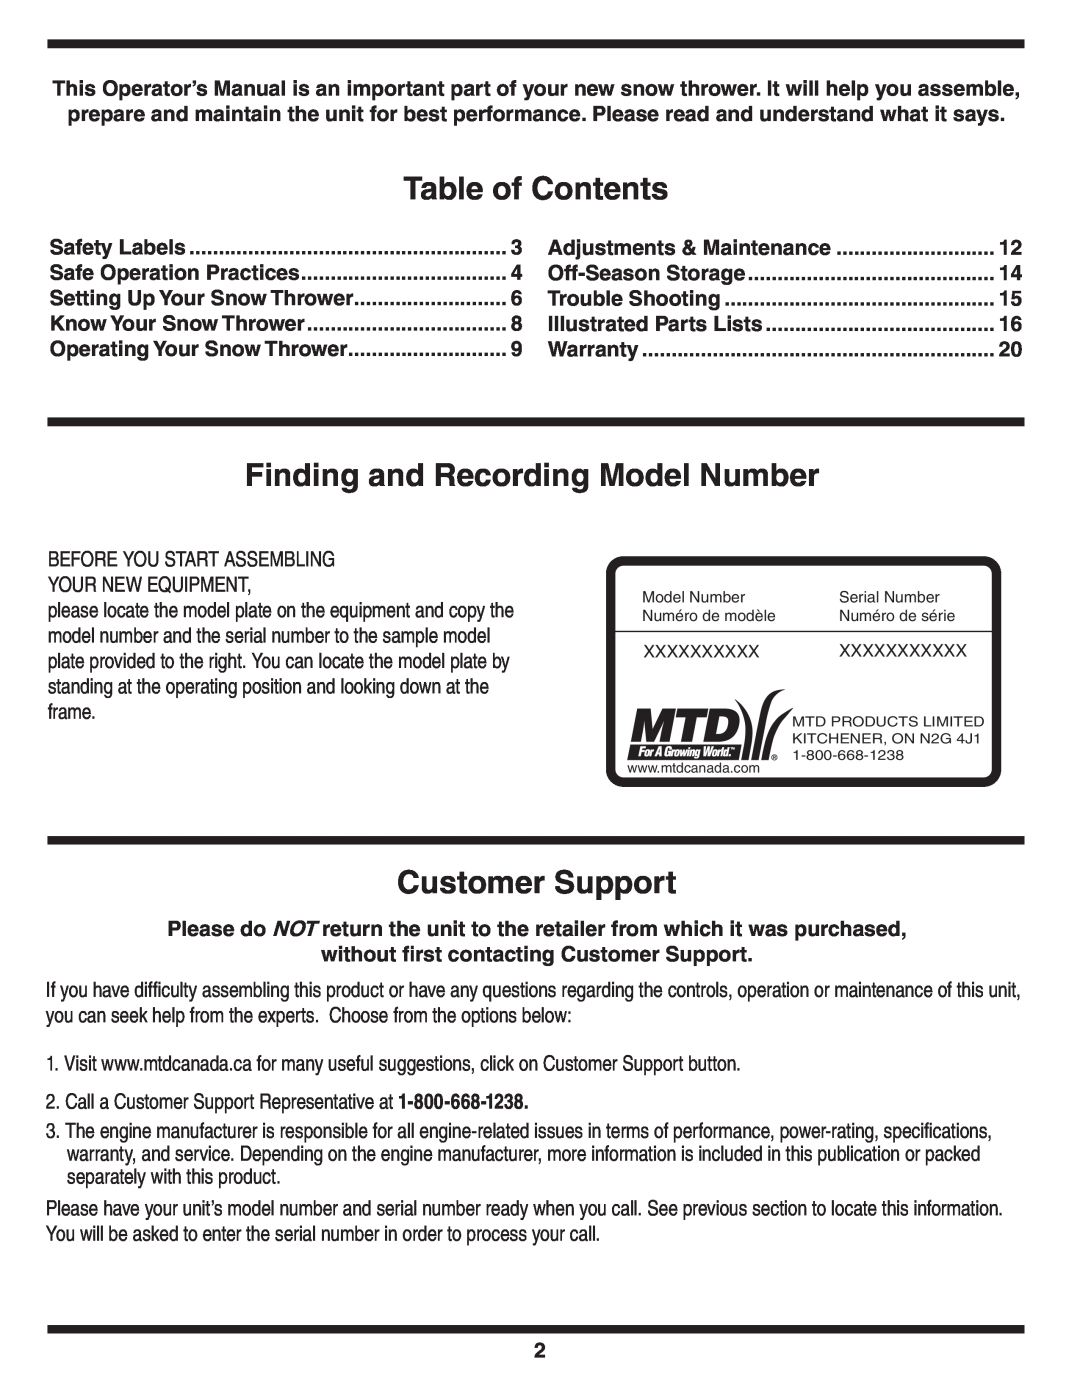 MTD Style L manual Table of Contents, Finding and Recording Model Number, Customer Support 